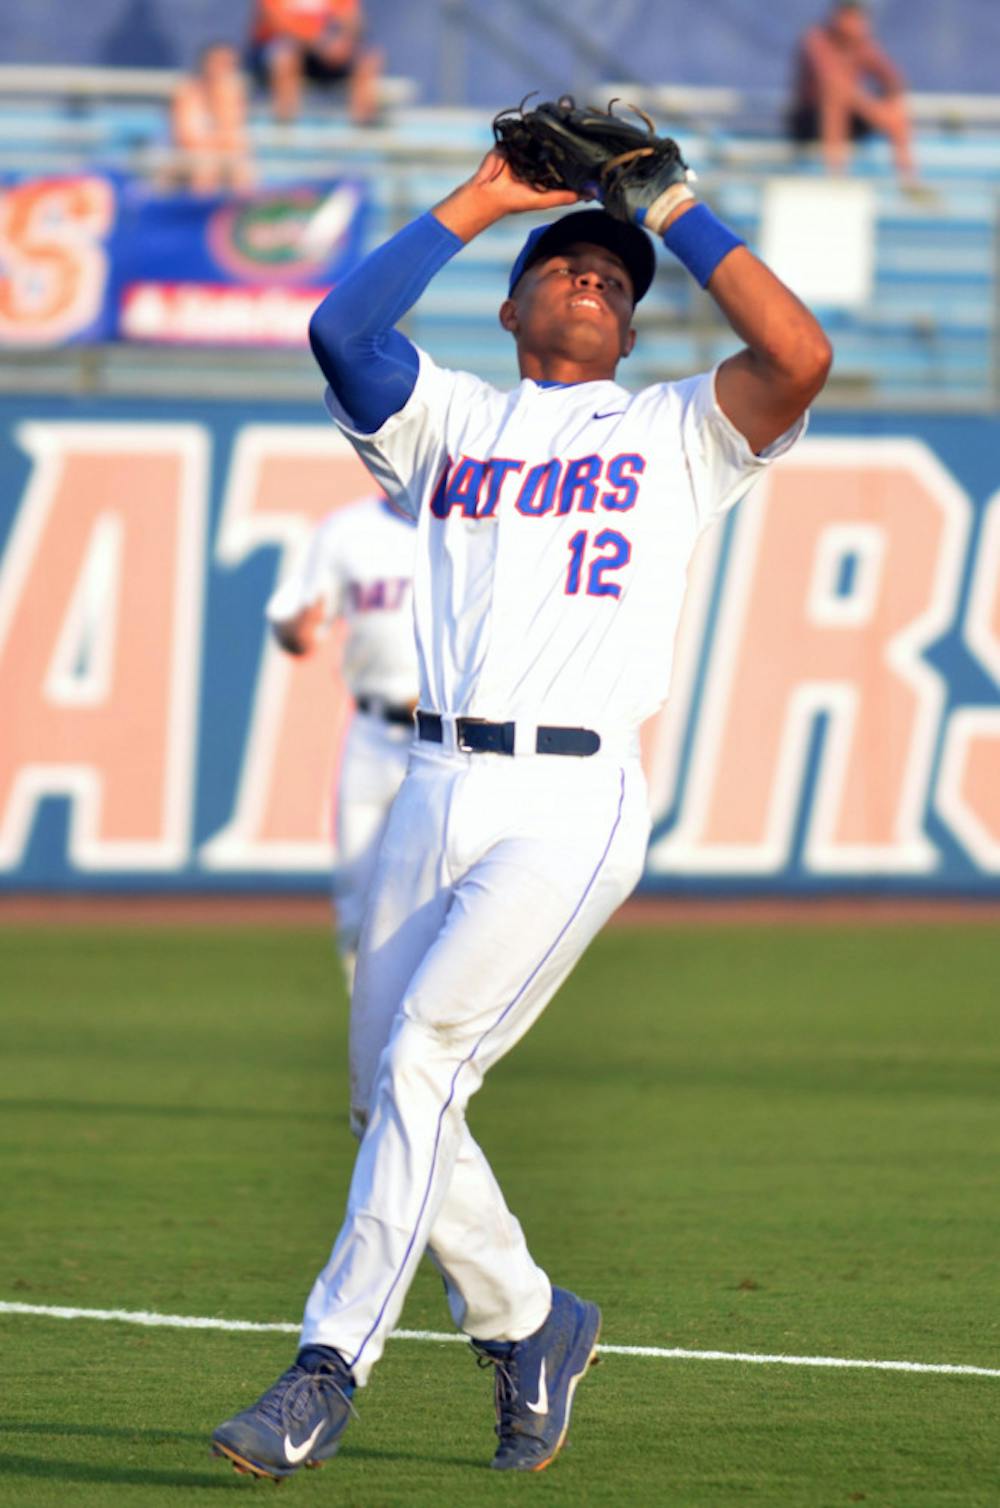 <p>UF shortstop Richie Martin catches a ball for a flyout during Florida's 14-3 win against the South Carolina Gamecocks on April 11, 2015 at McKethan Stadium.</p>